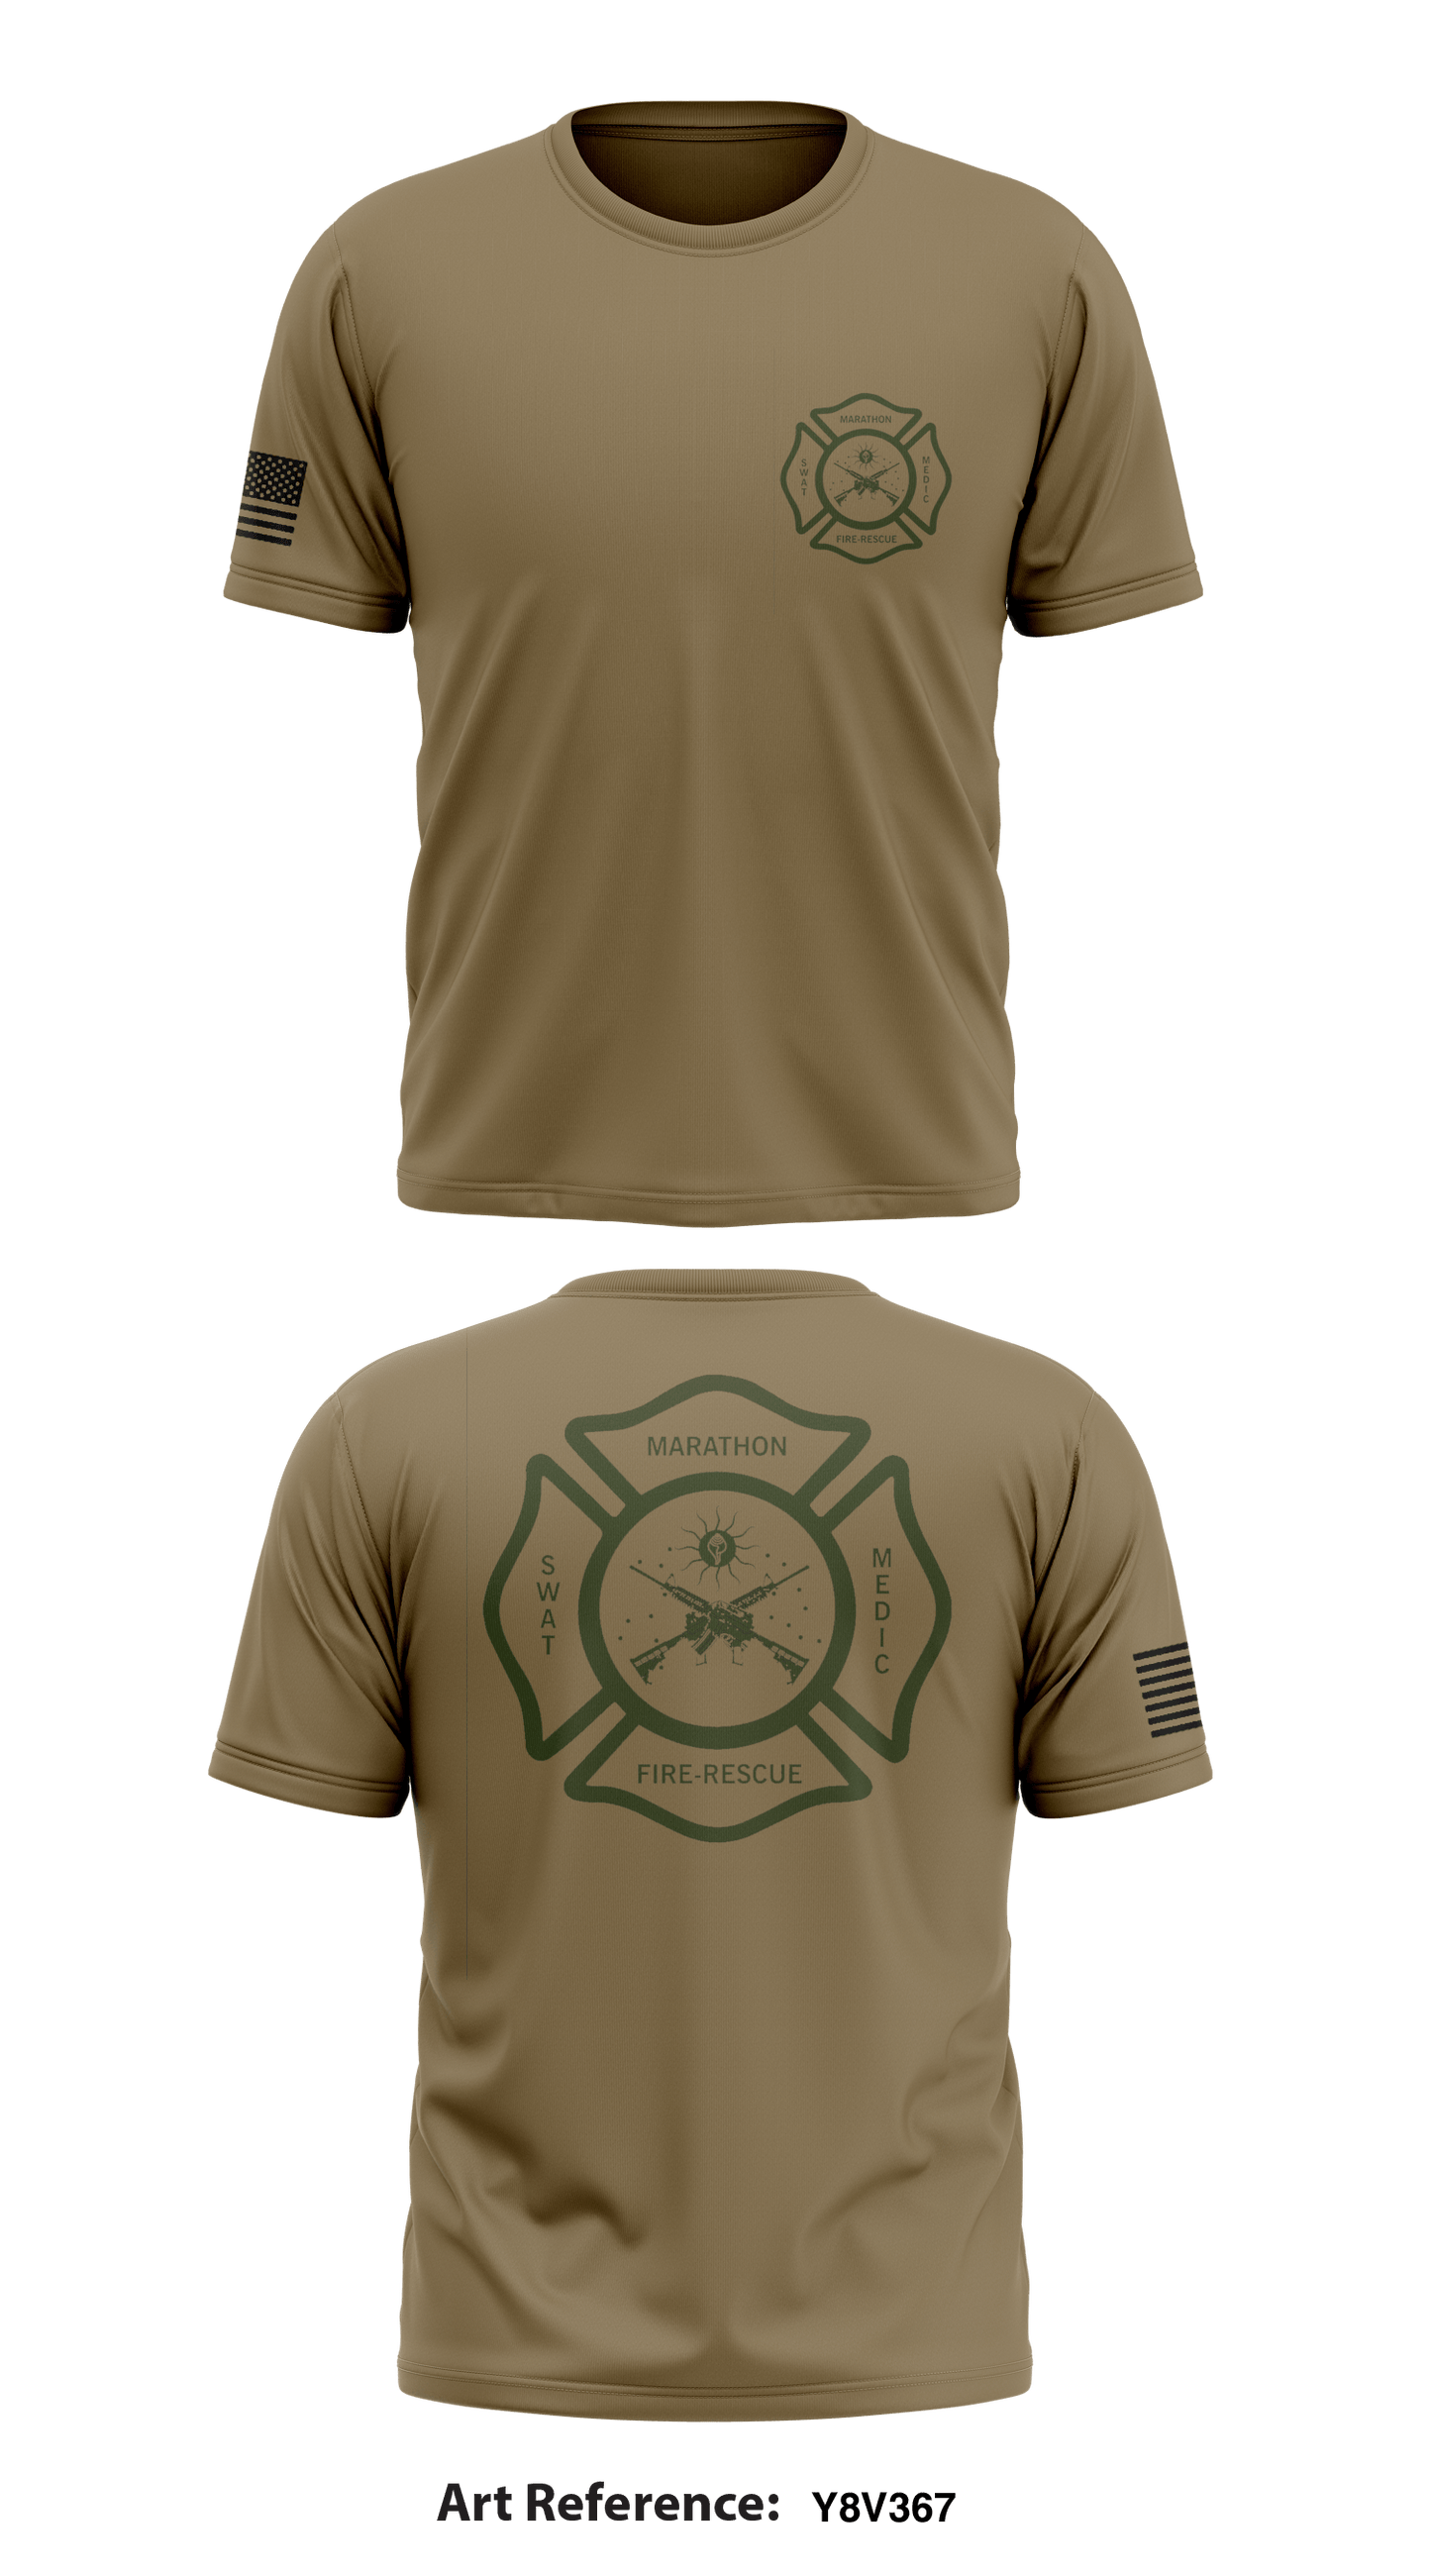 MCSO Swat Store 1 Core Men's SS Performance Tee - Y8V367